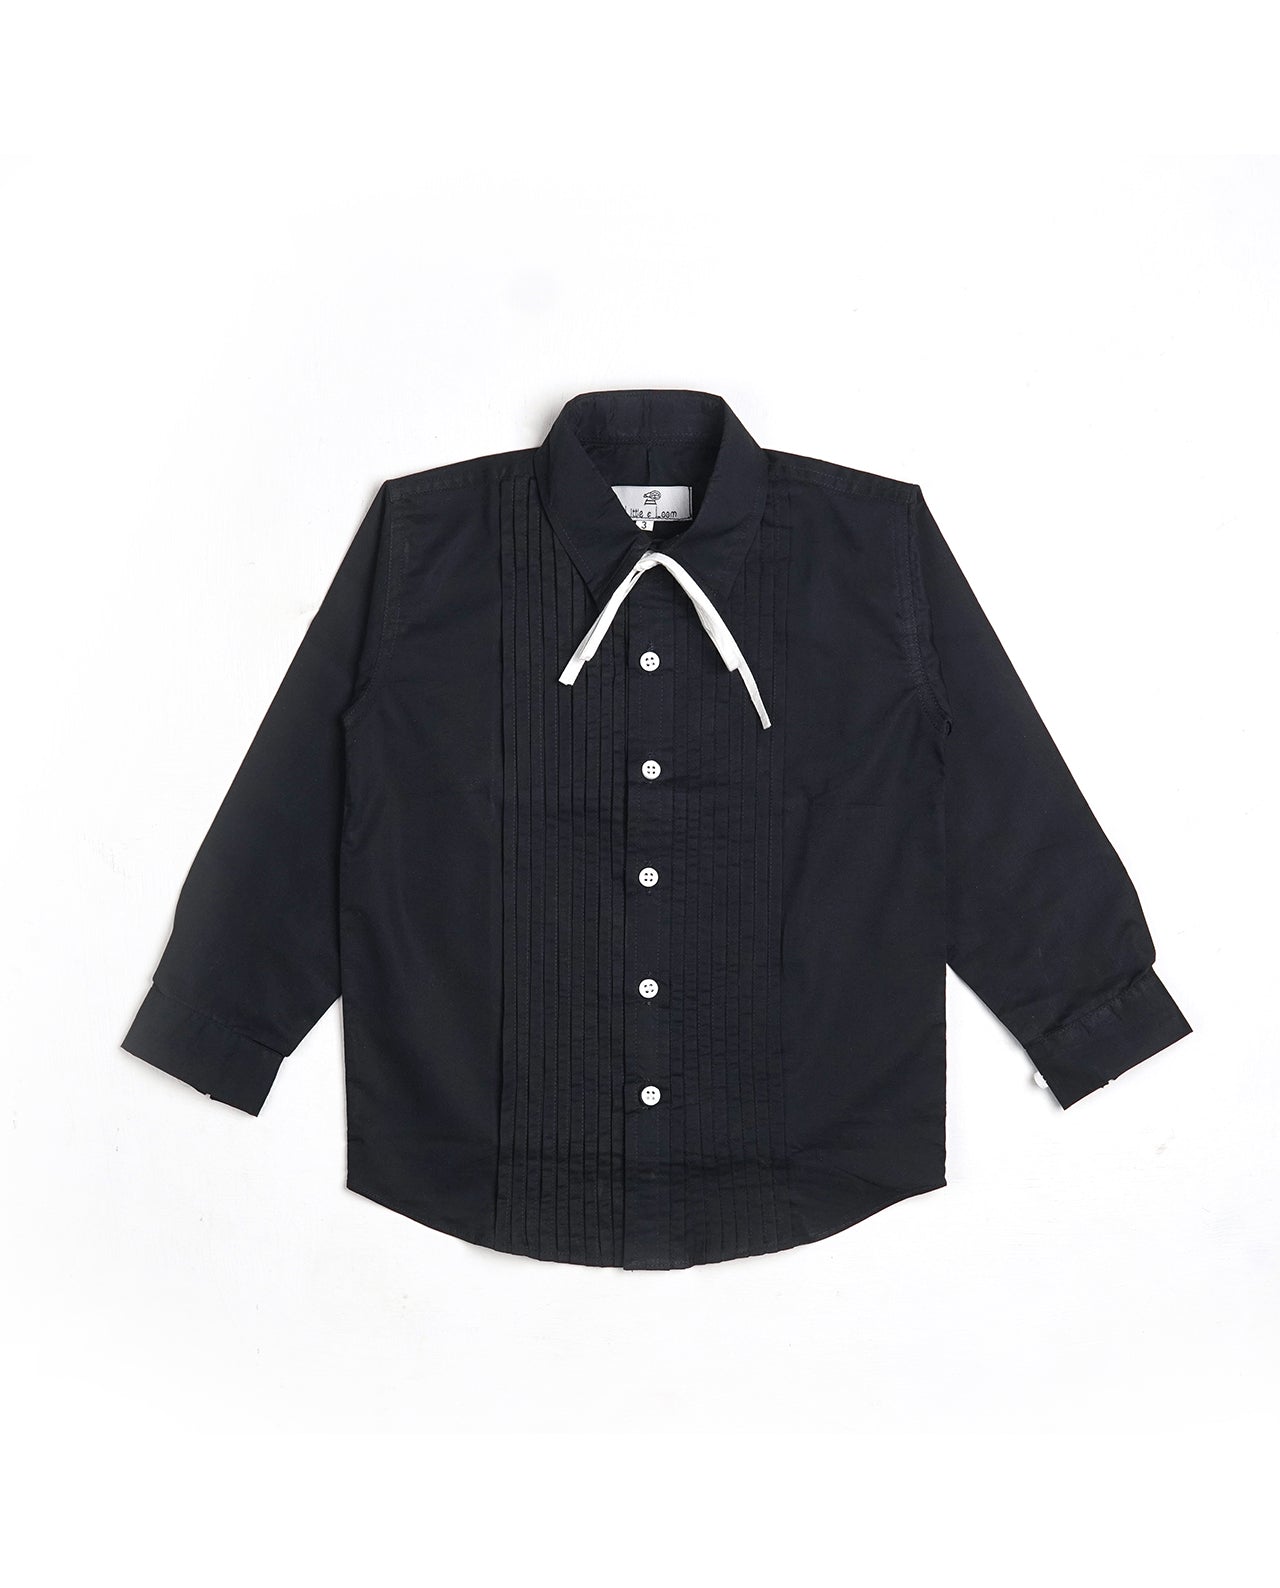 BLACK PLEATED SHIRT WITH WHITE RIBBON